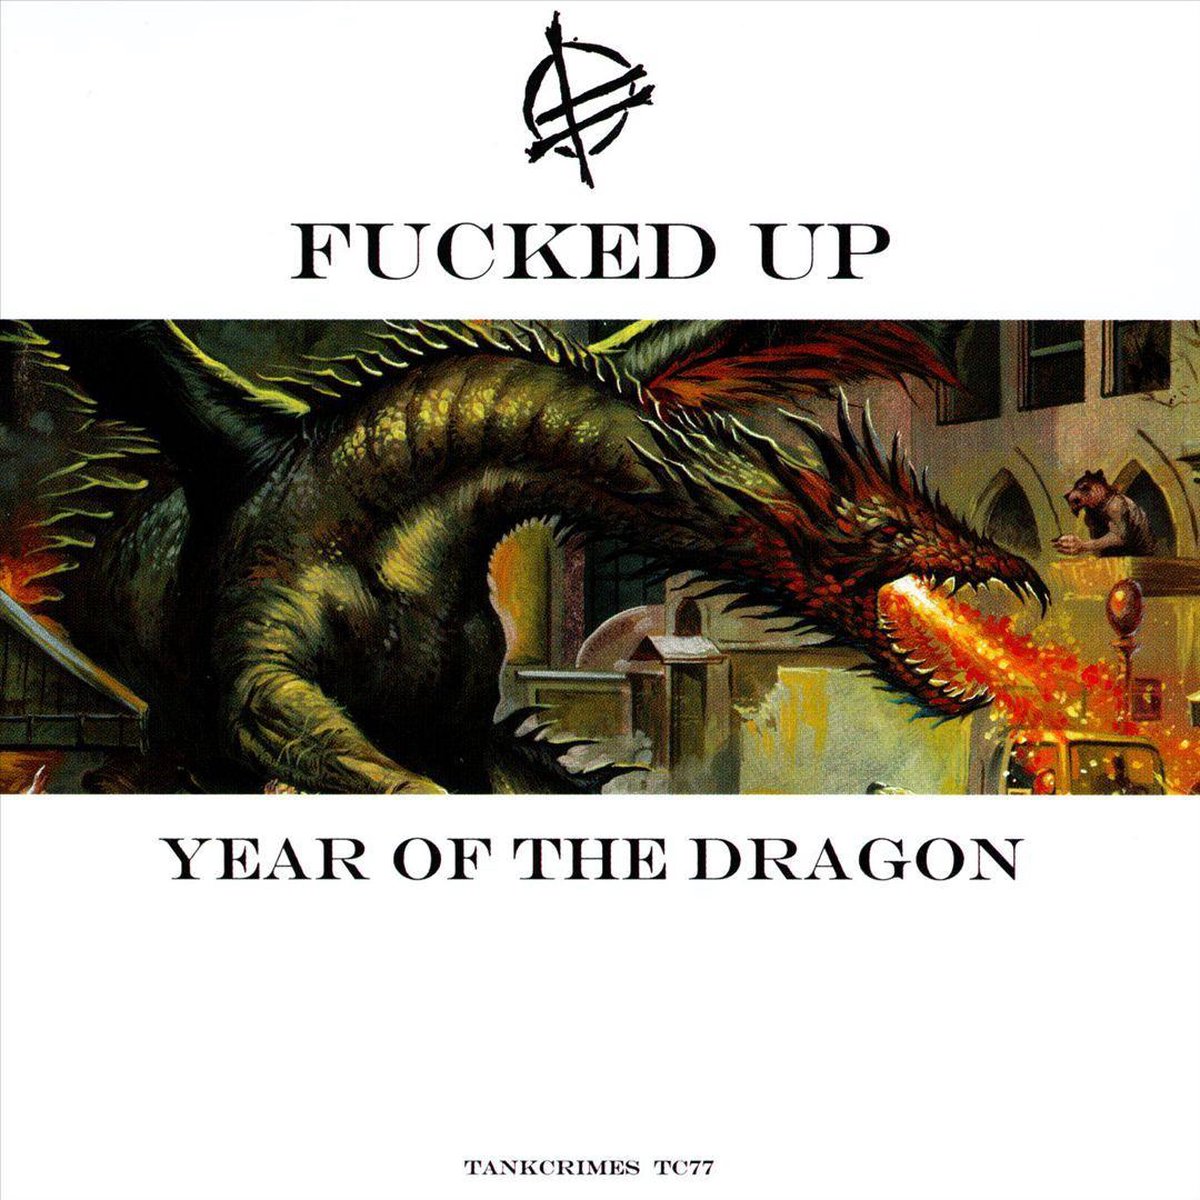 Fucked Up - Year Of The..  |  Vinyl LP | Fucked Up - Year Of The Dragon (2 LPs) | Records on Vinyl